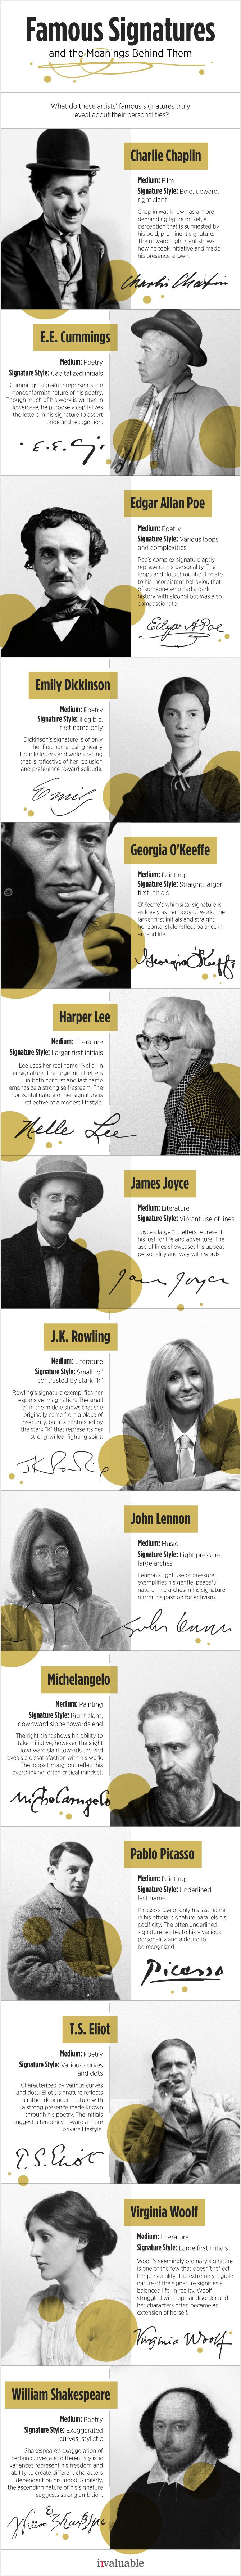 14 Famous Signatures and The Meanings Behind Them